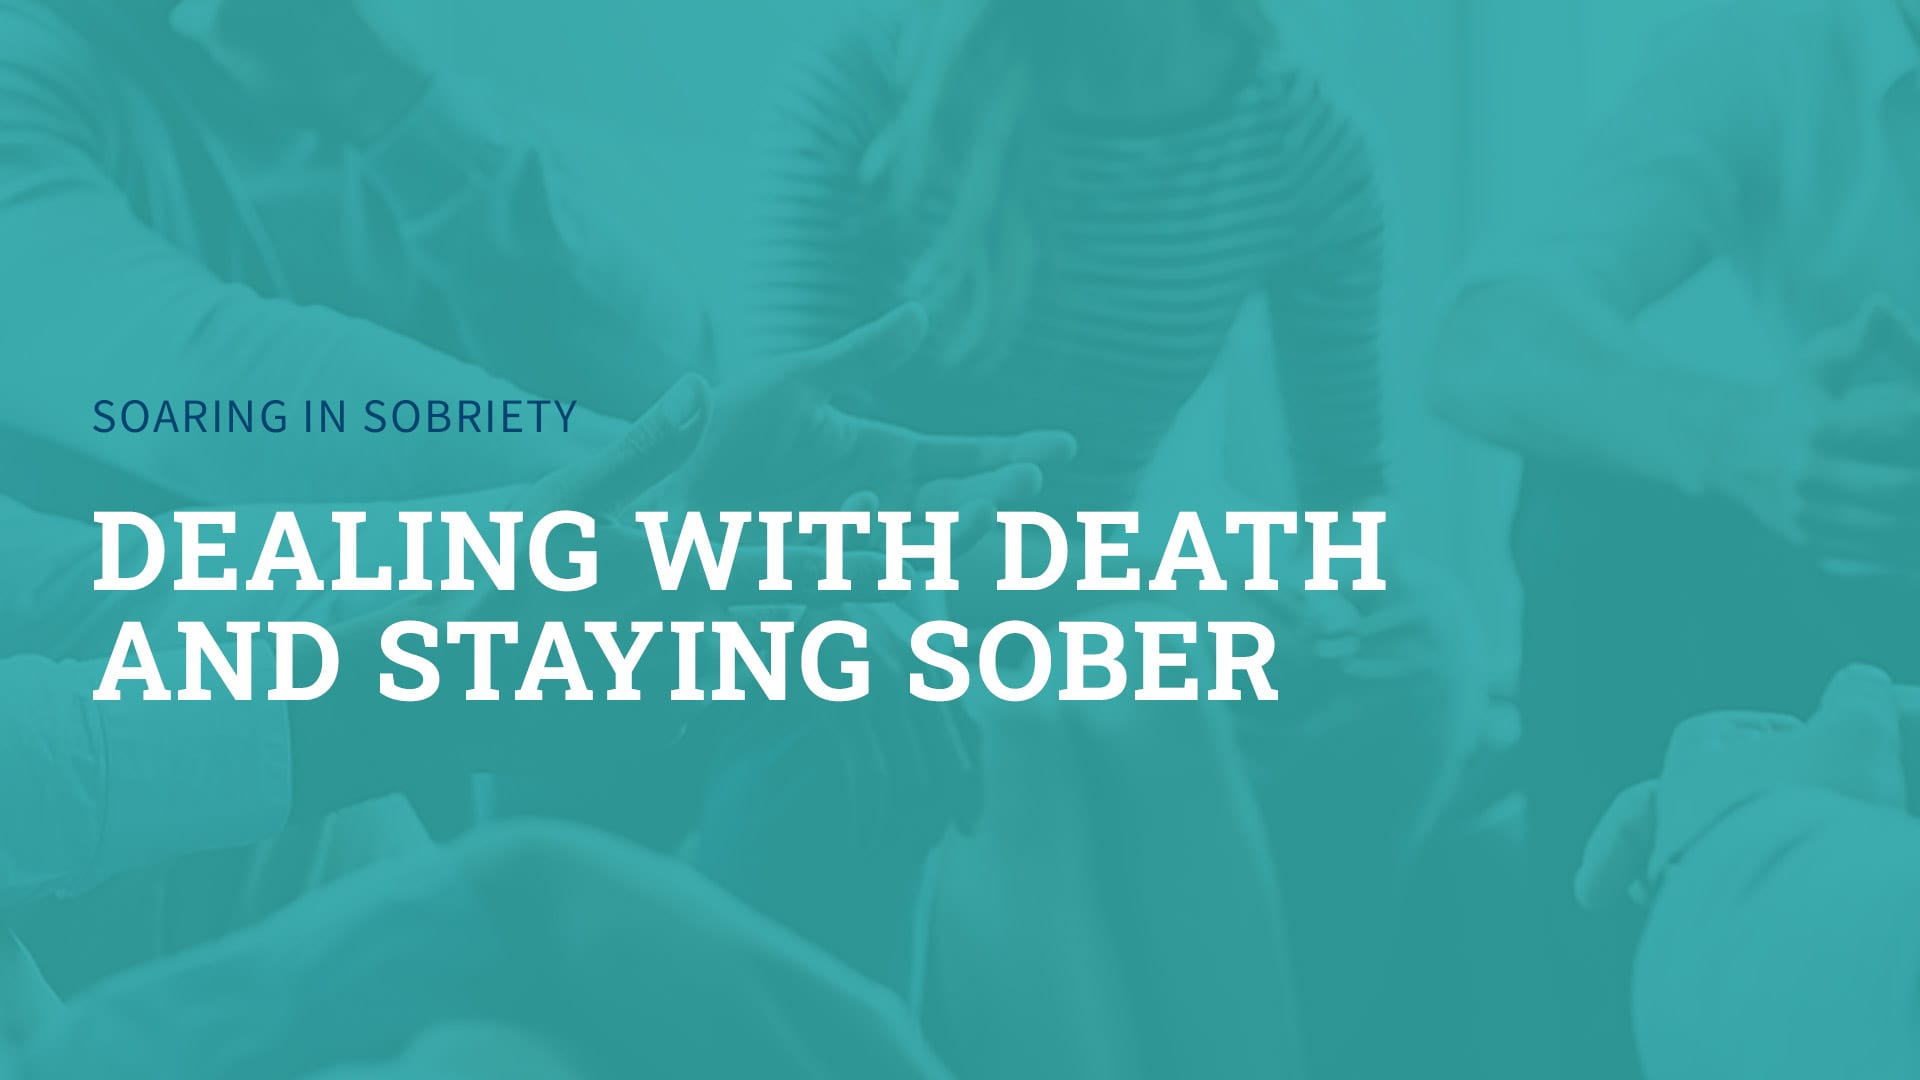 Dealing with death and staying sober